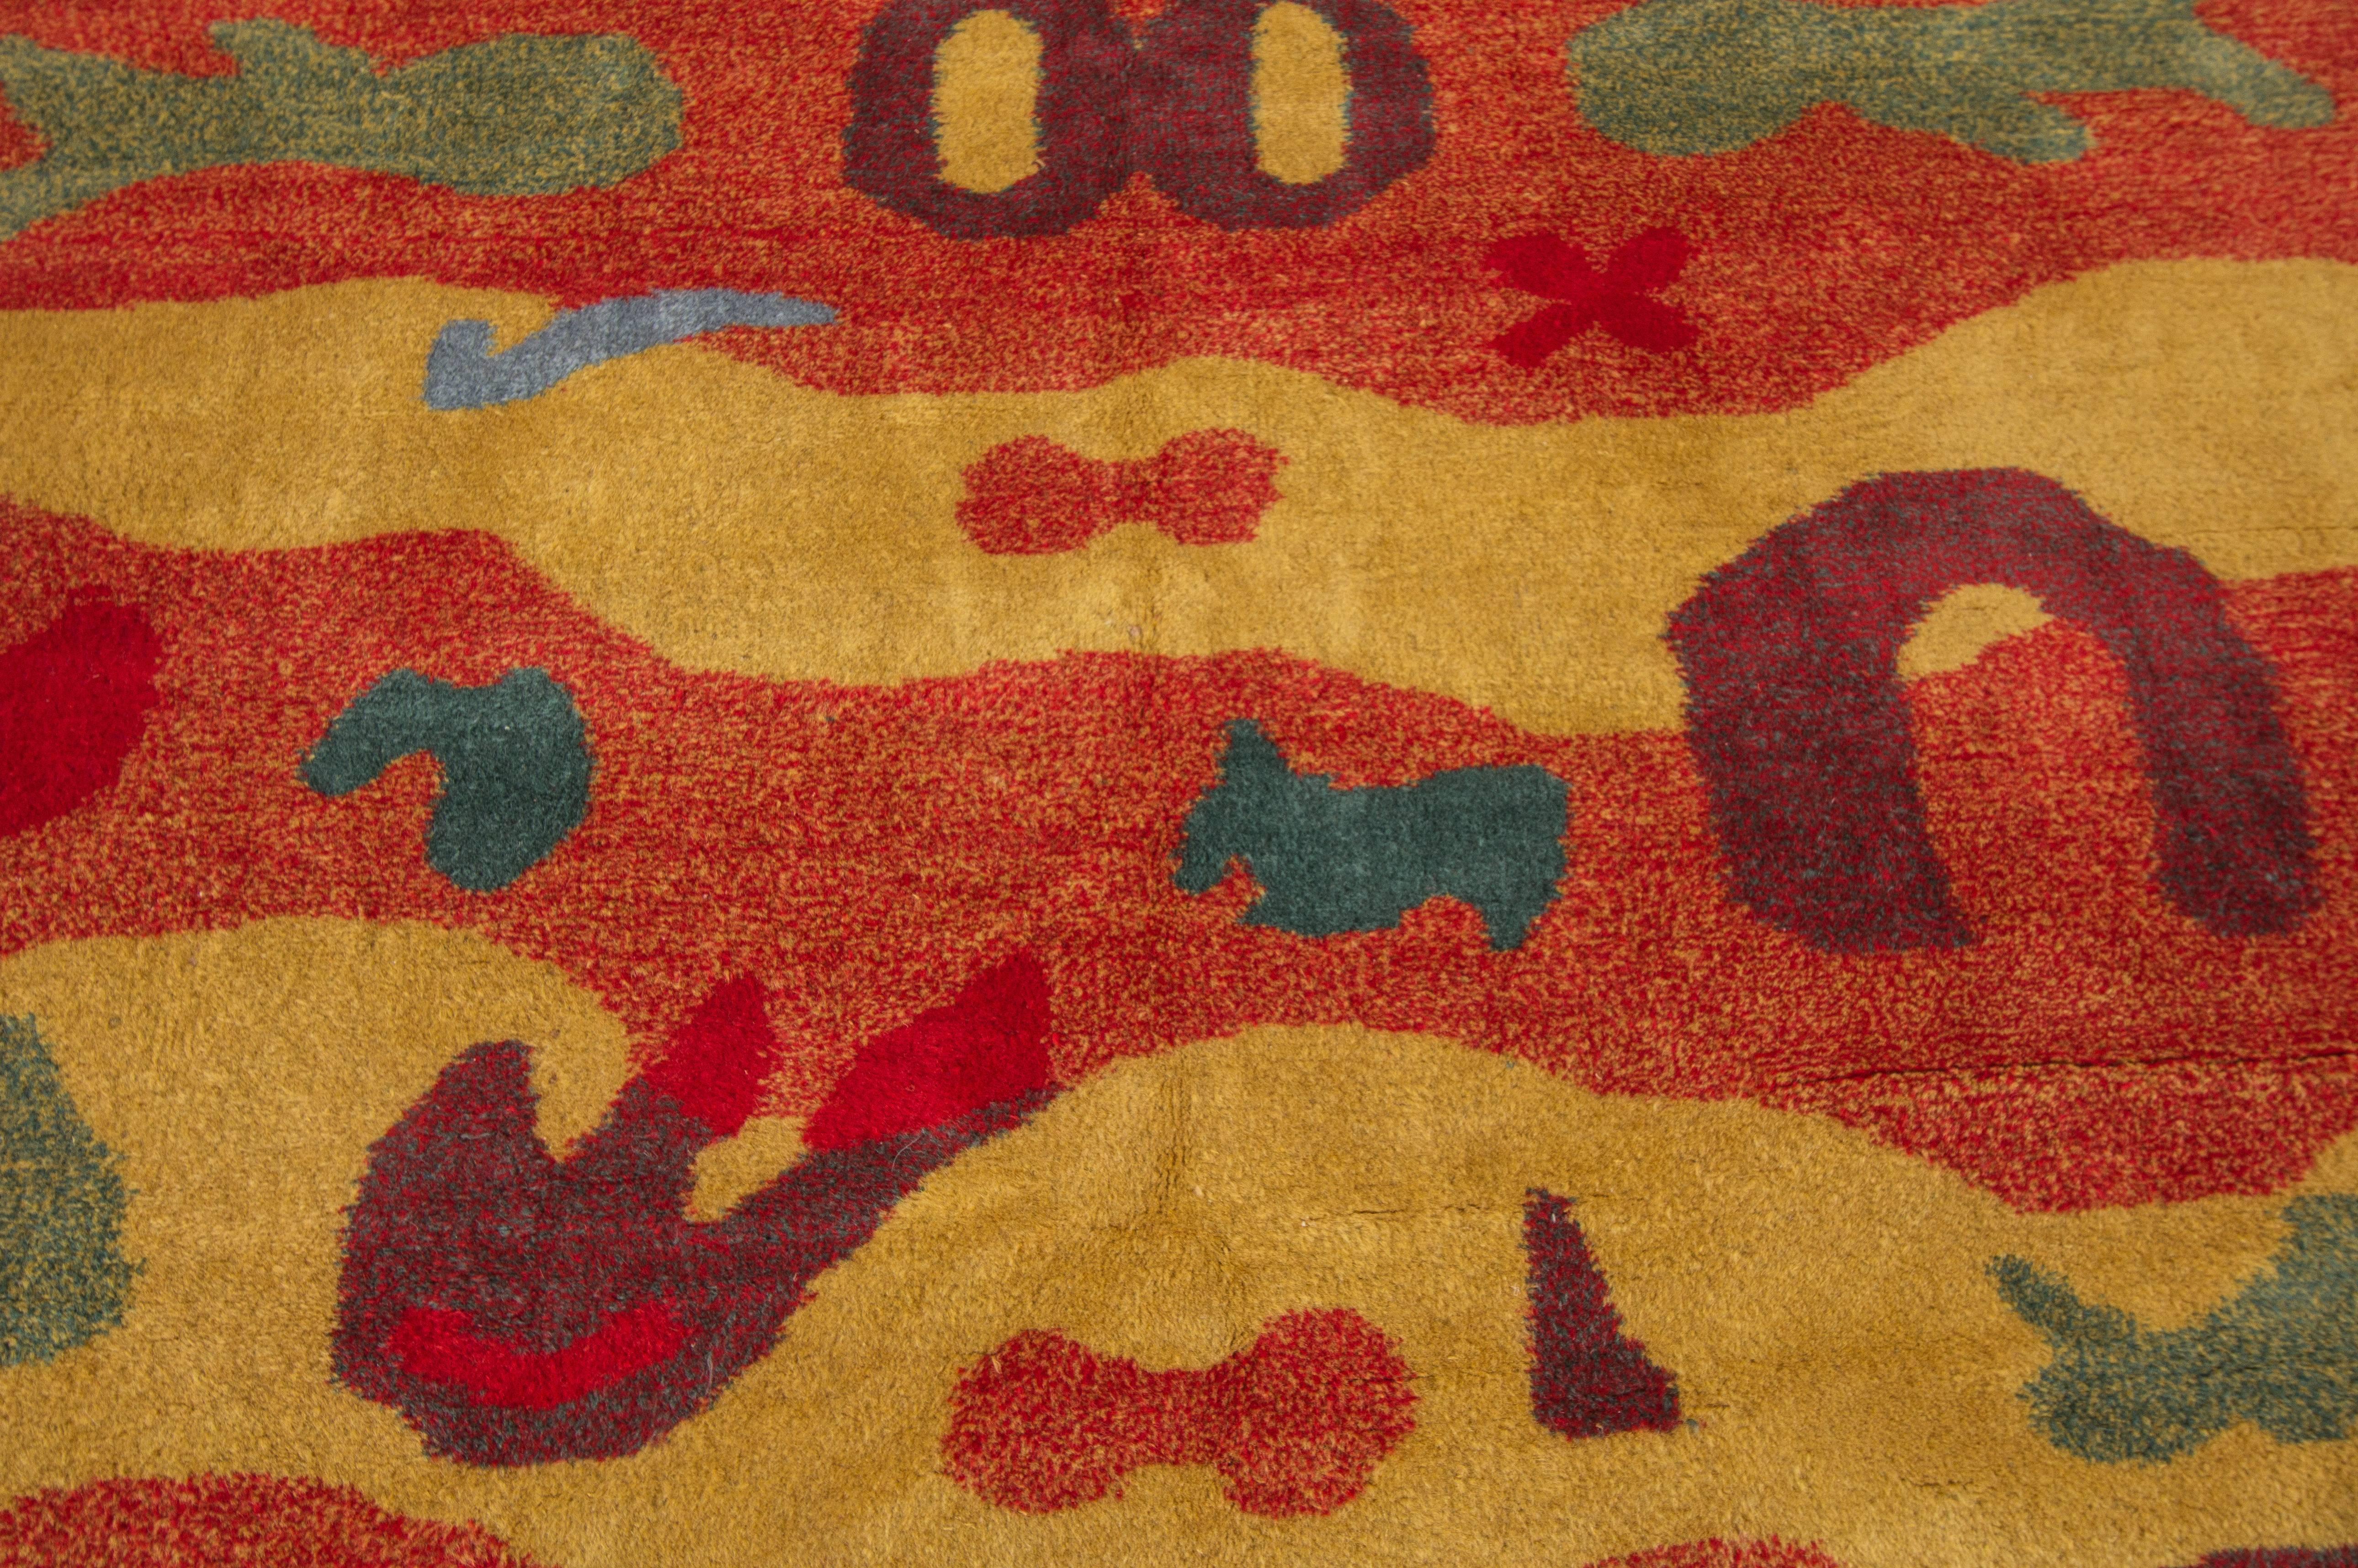 A vintage Turkish rug with an artistic design on a yellow and orange field. Accents of blue, green and purple throughout the piece in artistic designs. Measures 5' x 8'.3.